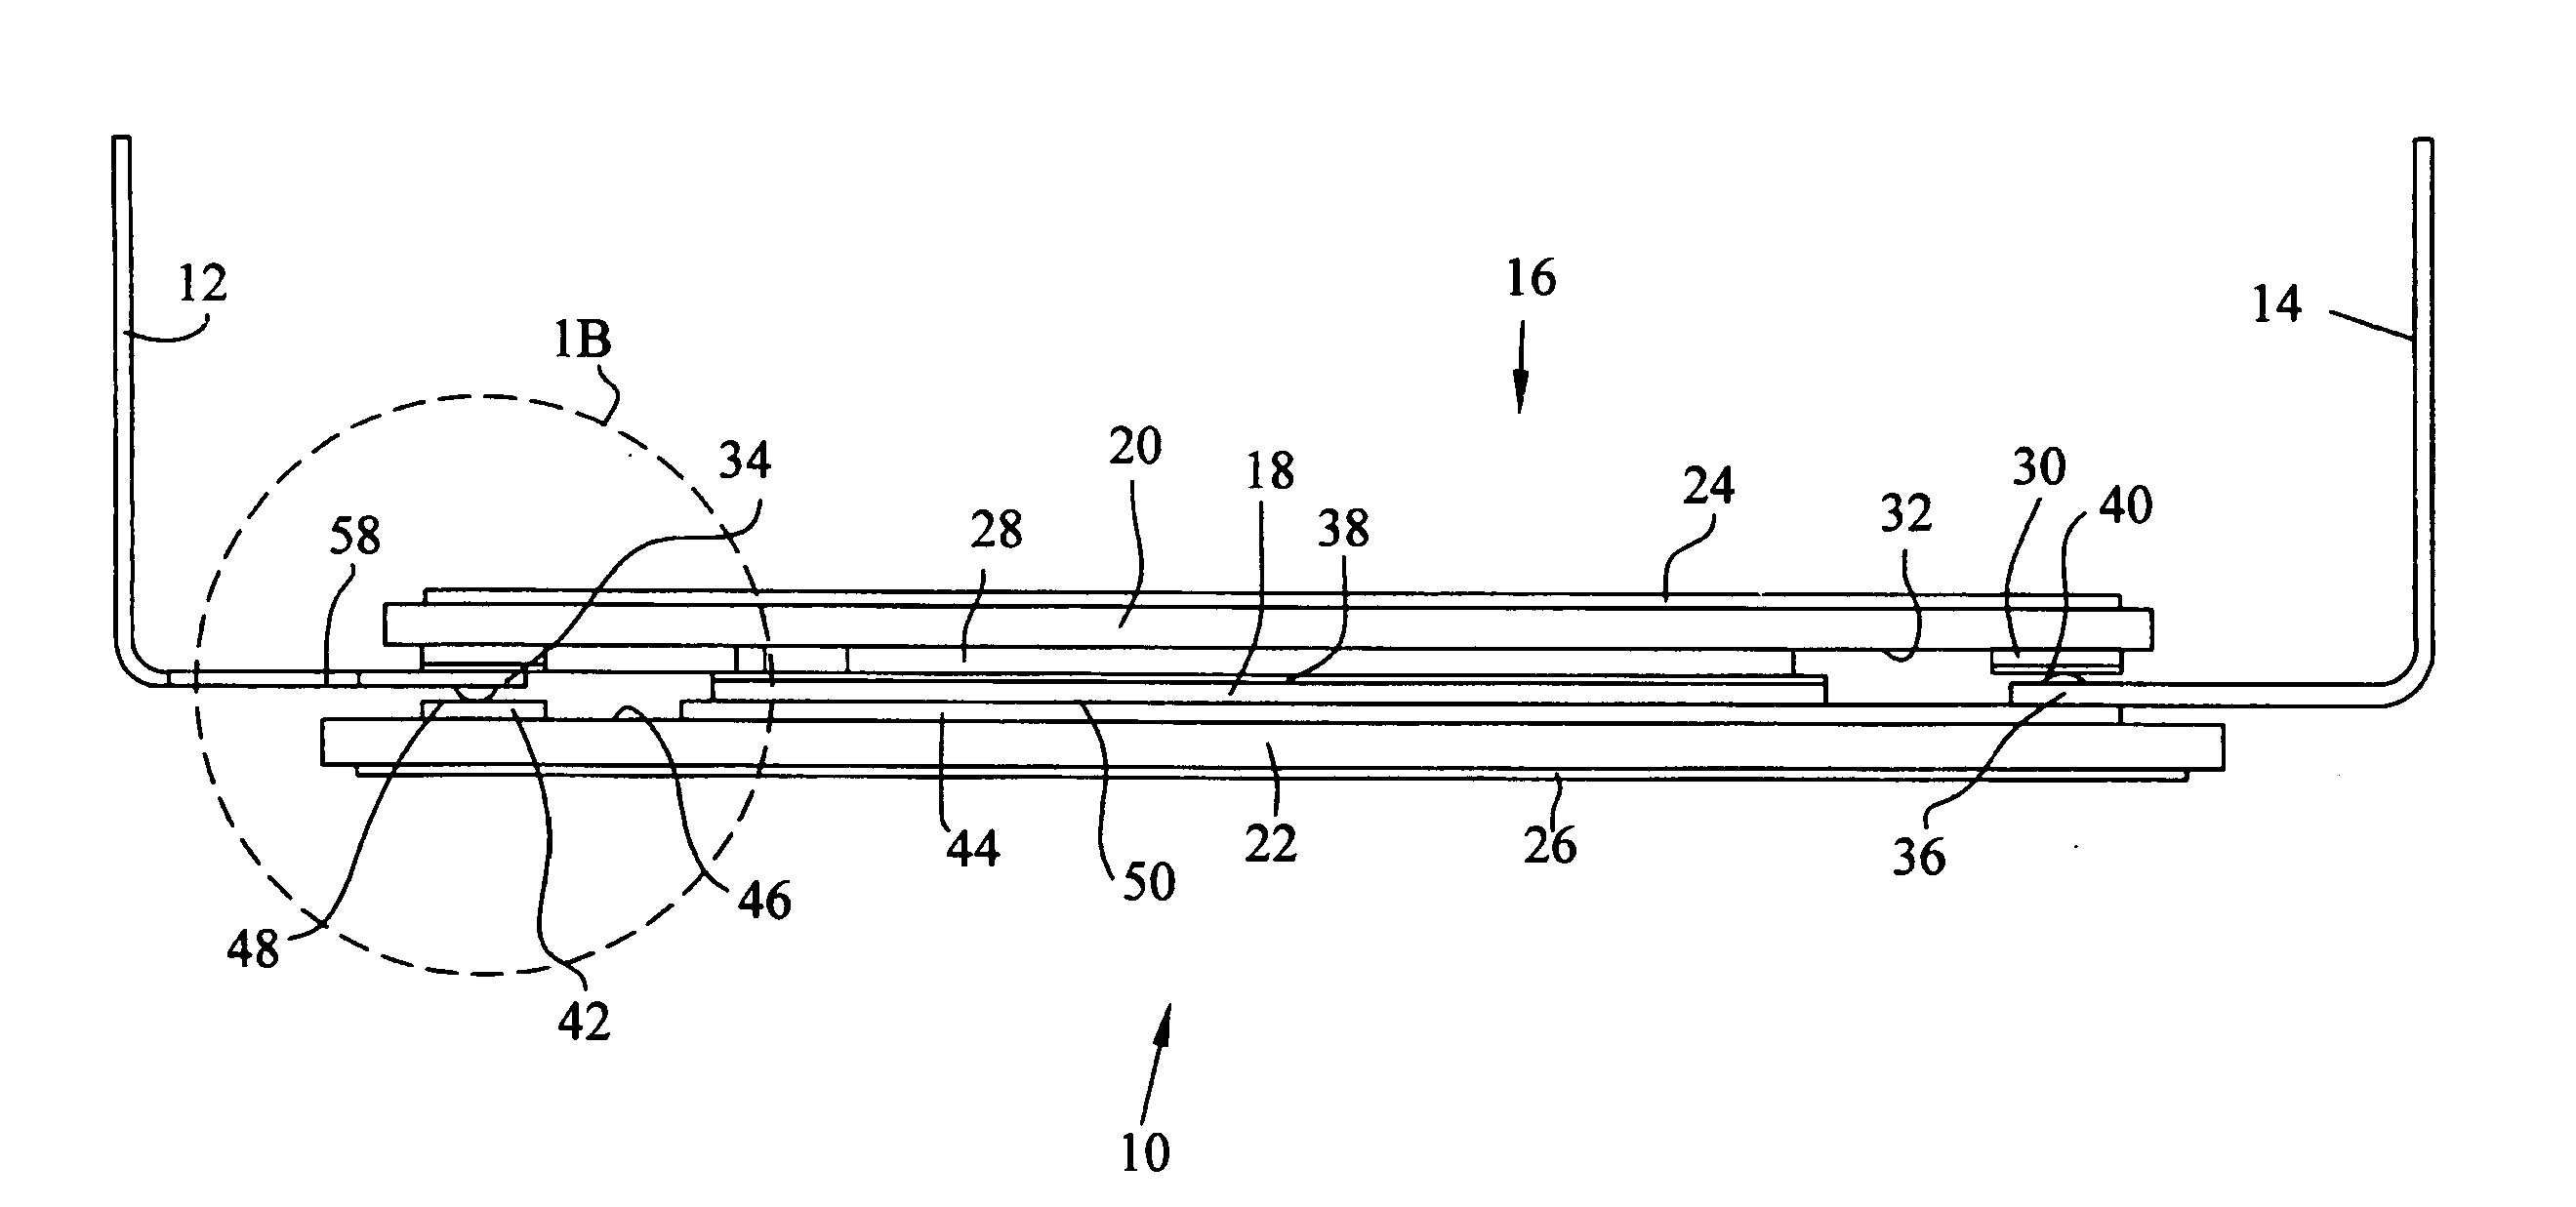 Dual-sided substrate integrated circuit package including a leadframe having leads with increased thickness